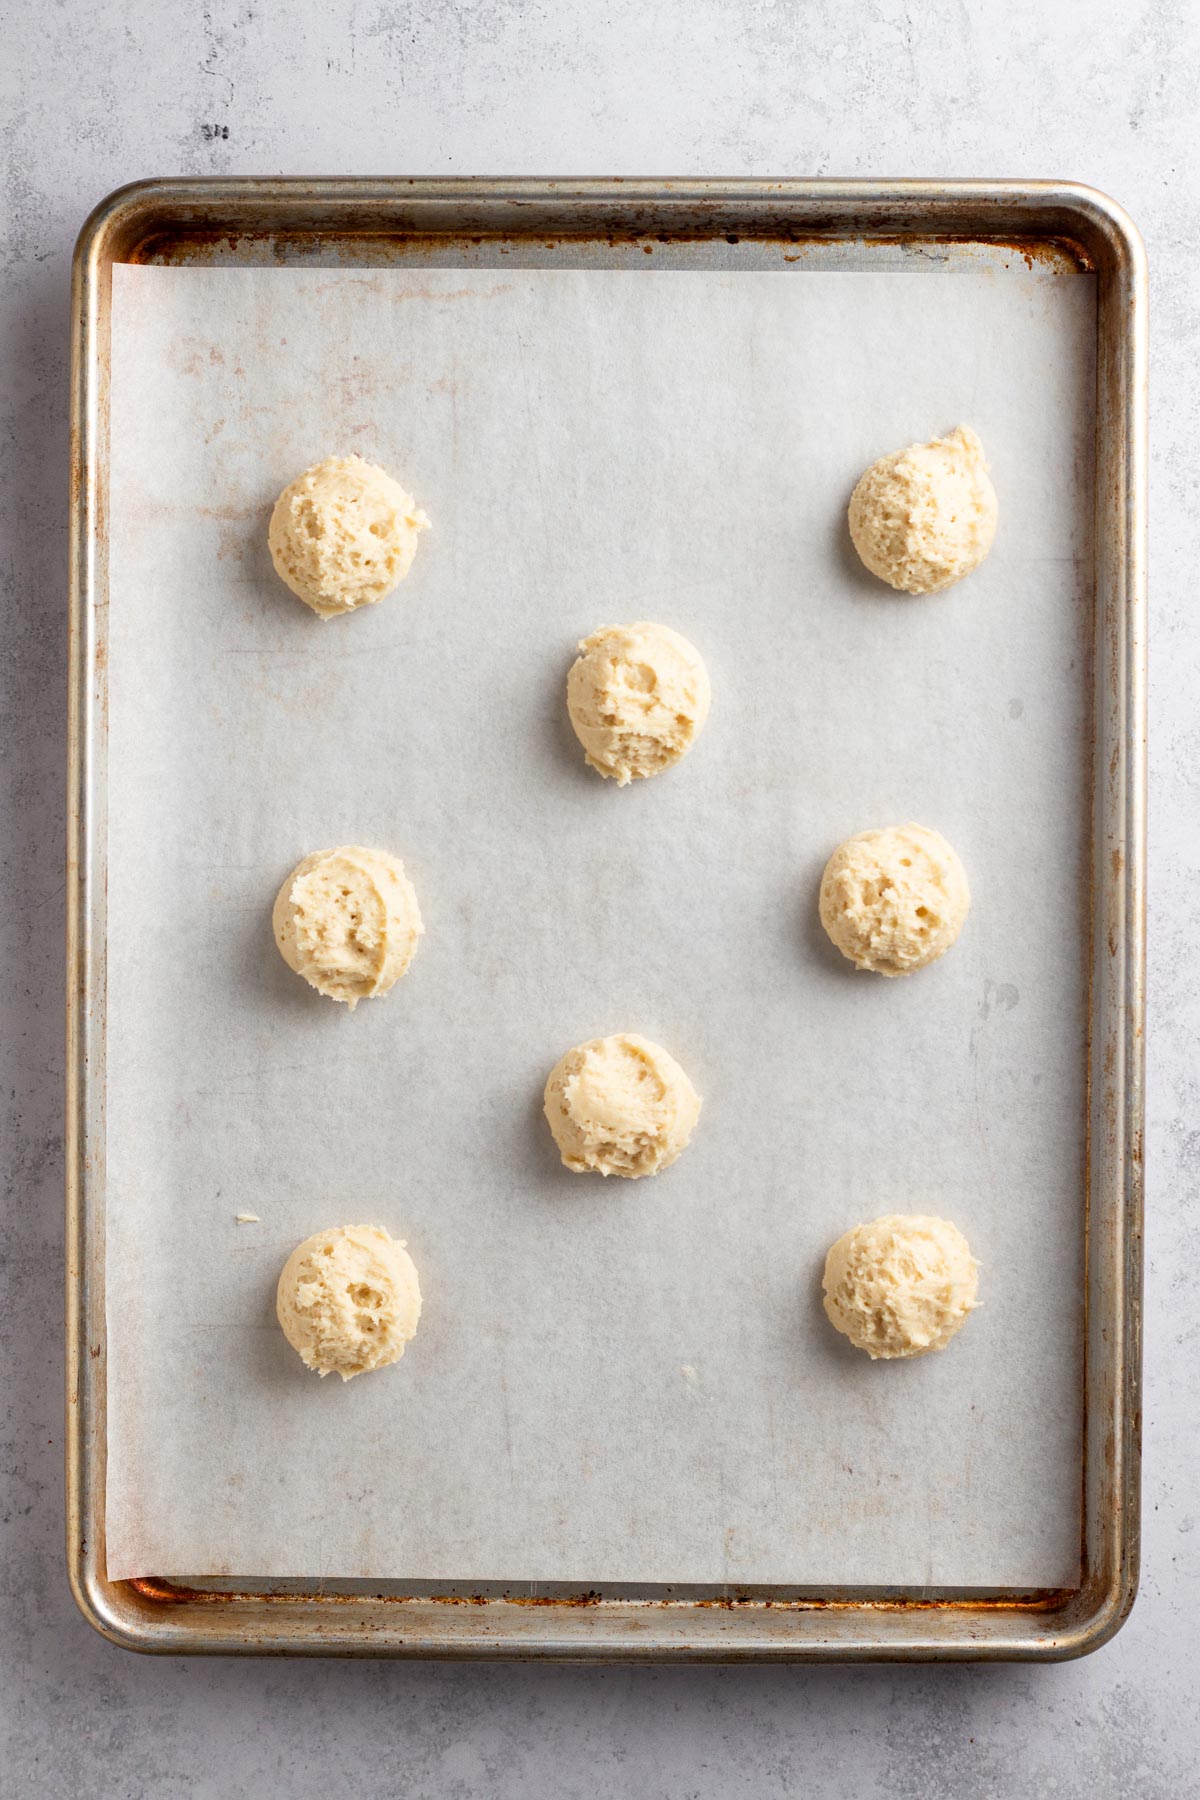 Scoops of cookie dough on a parchment-lined baking sheet.